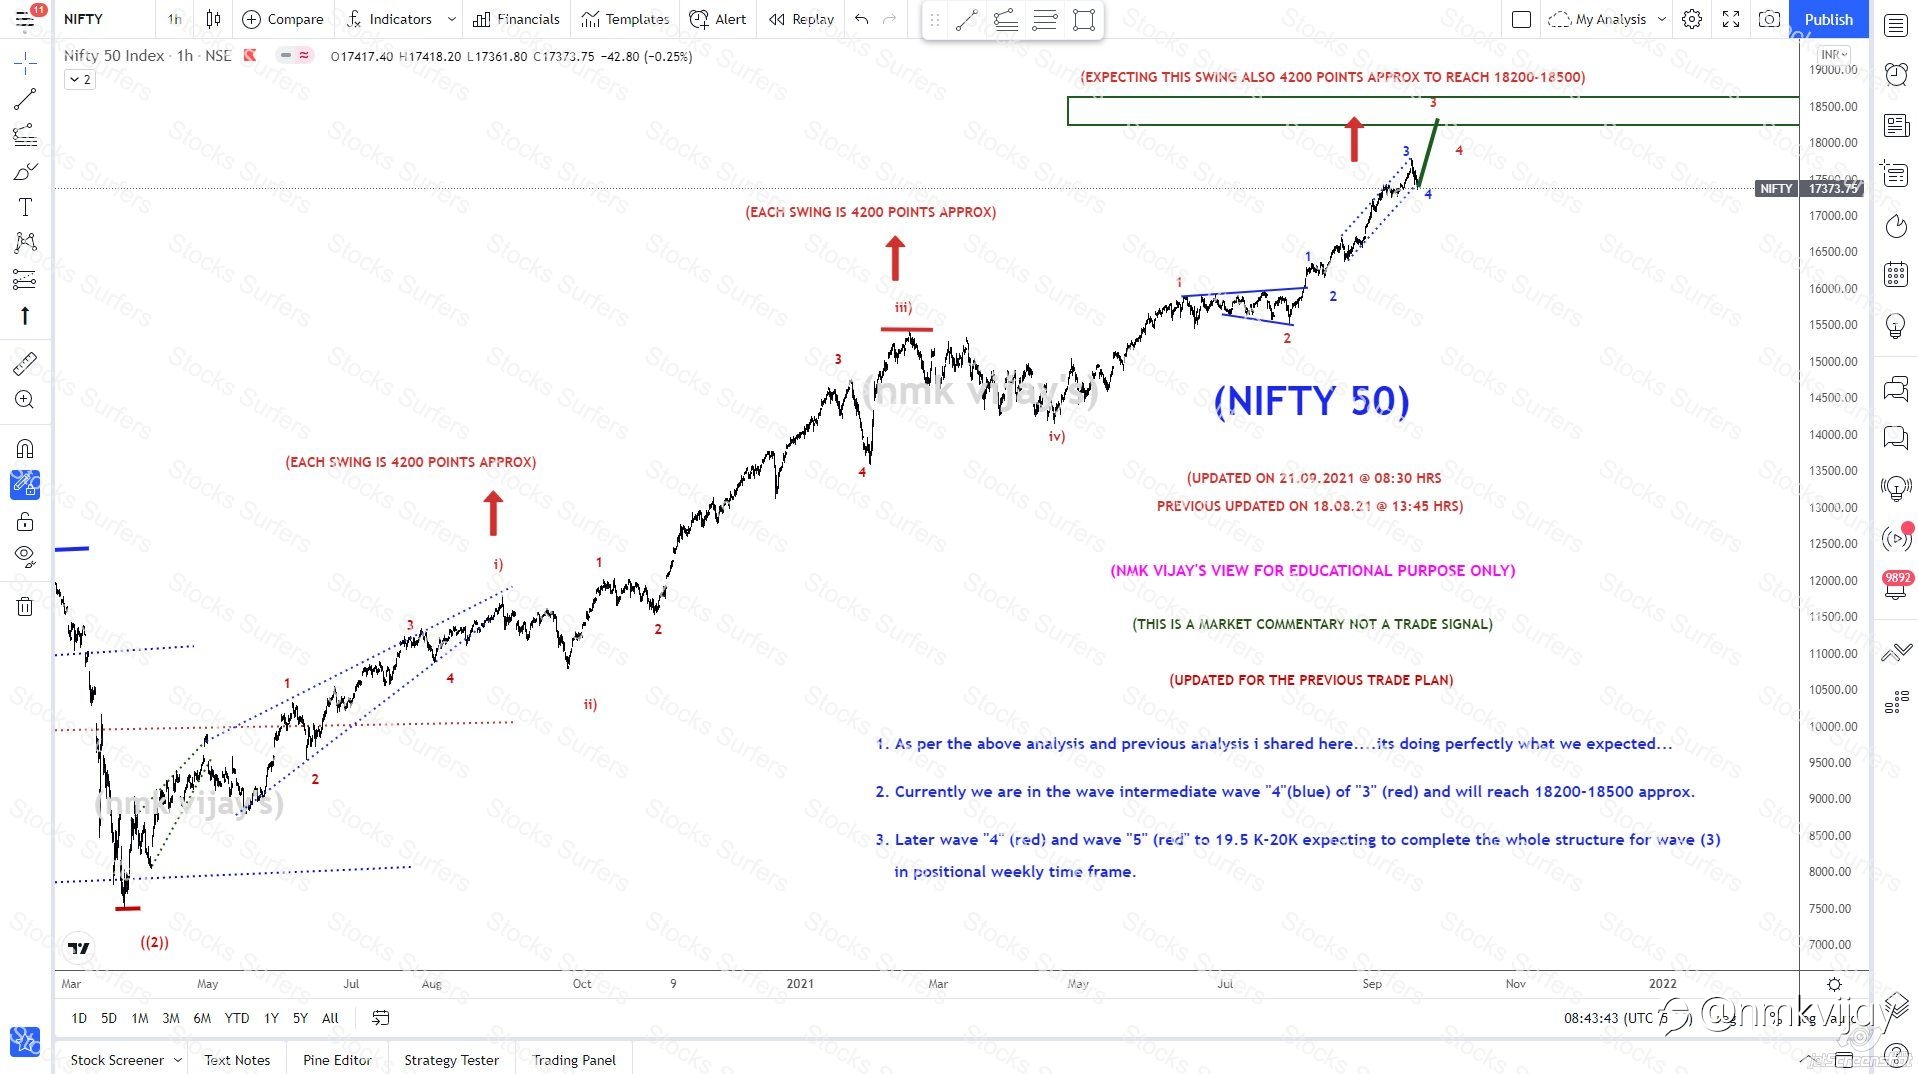 NIFTY- What we expecting is on the way and we are riding perfect